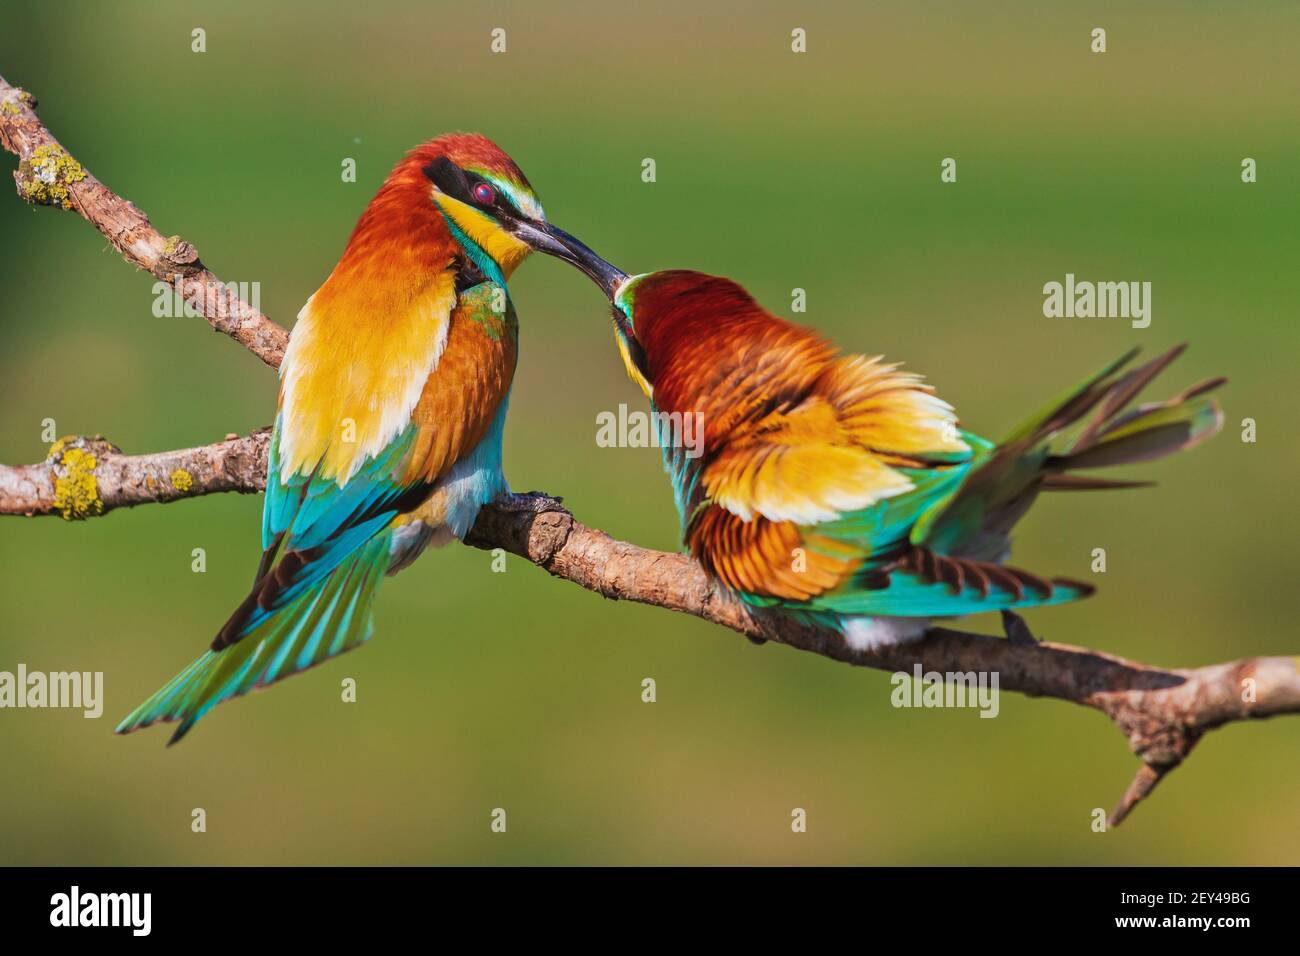 spring colorful birds kissing on the branch Stock Photo